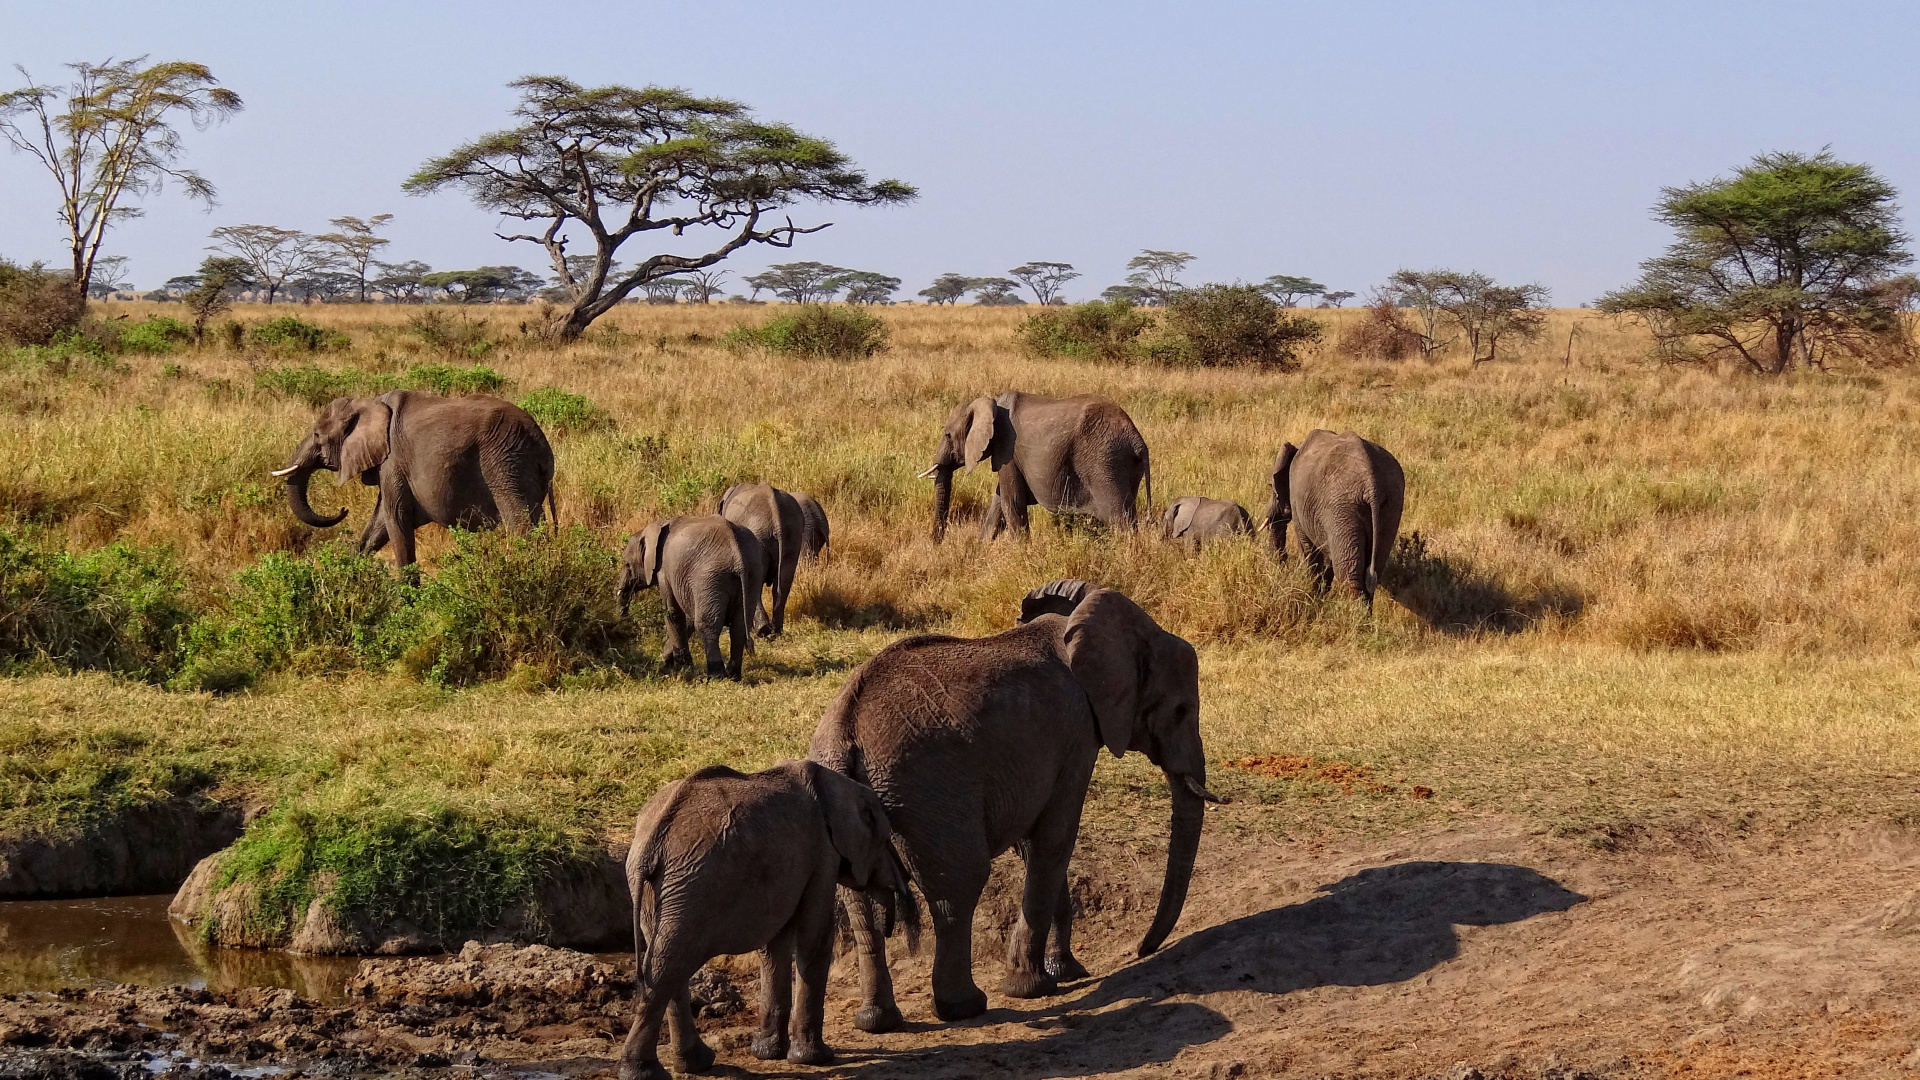 Group of Elephant Walking on Brown Field During Daytime. Wallpaper in 1920x1080 Resolution